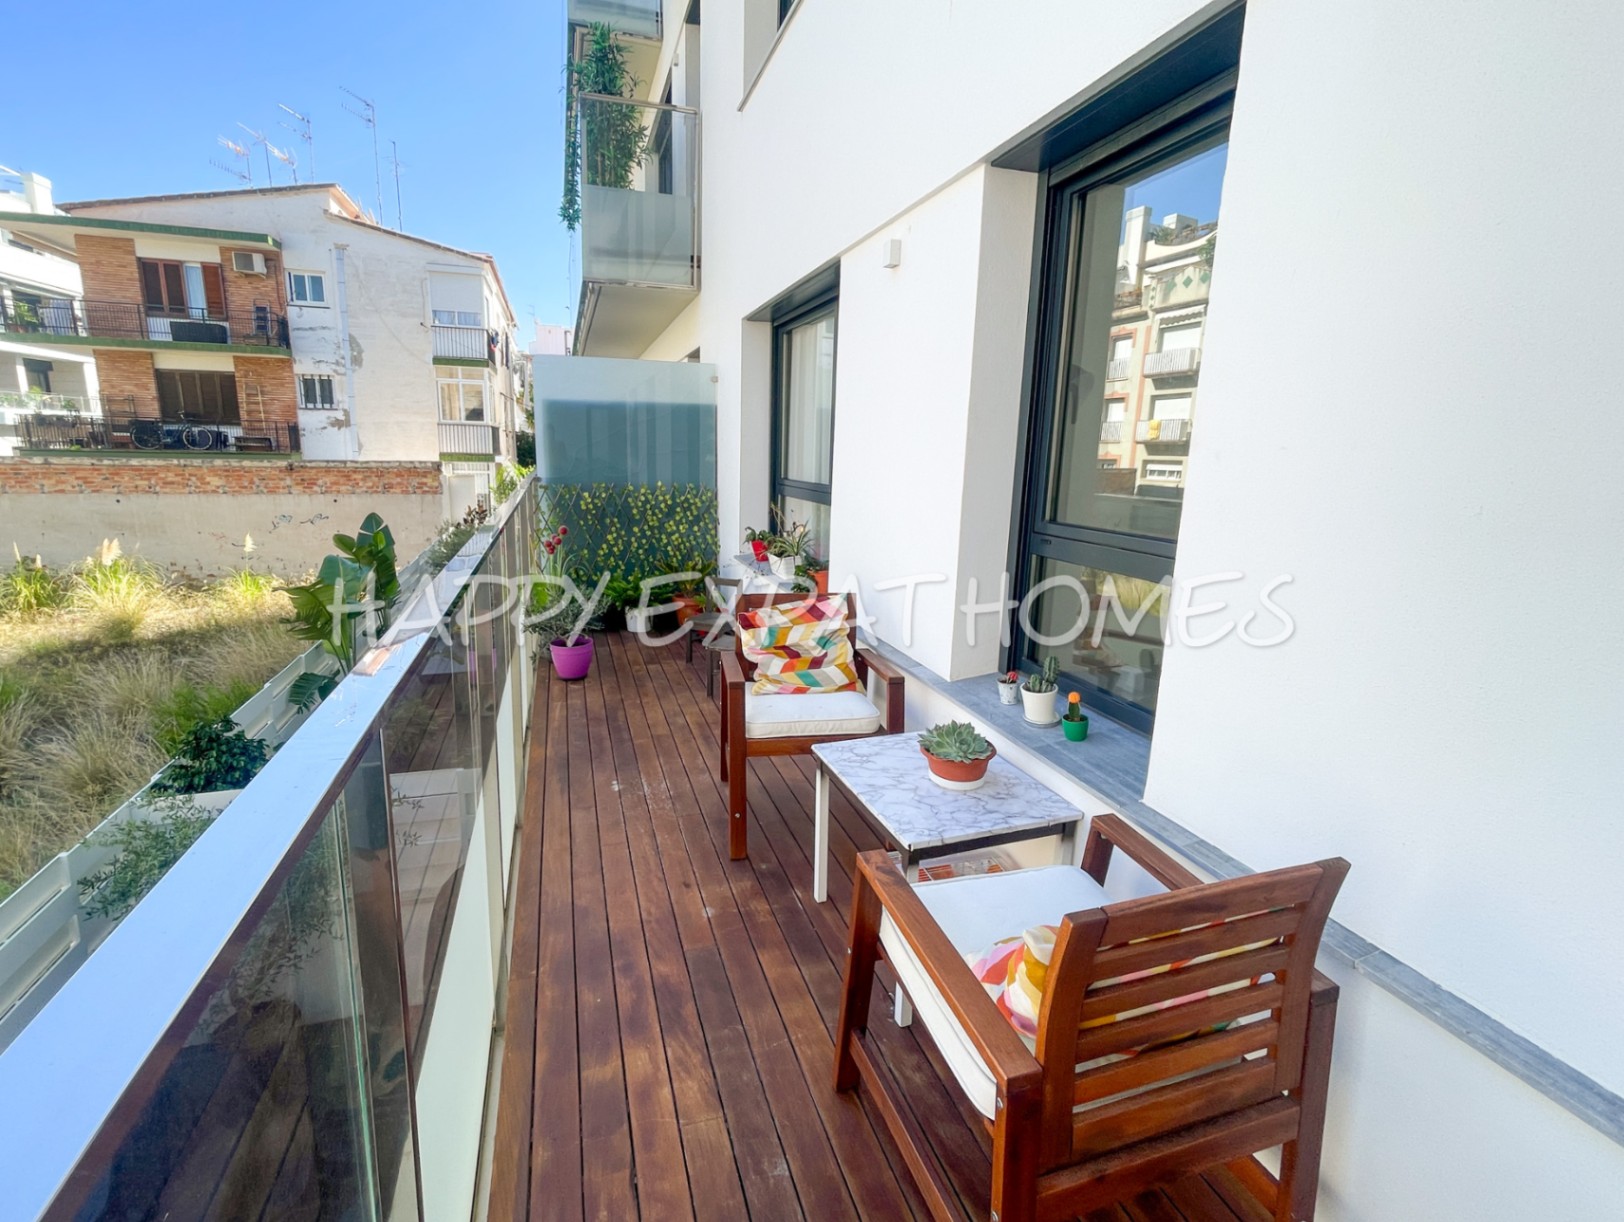 Modern apartment with pool and gym - Sitges beach